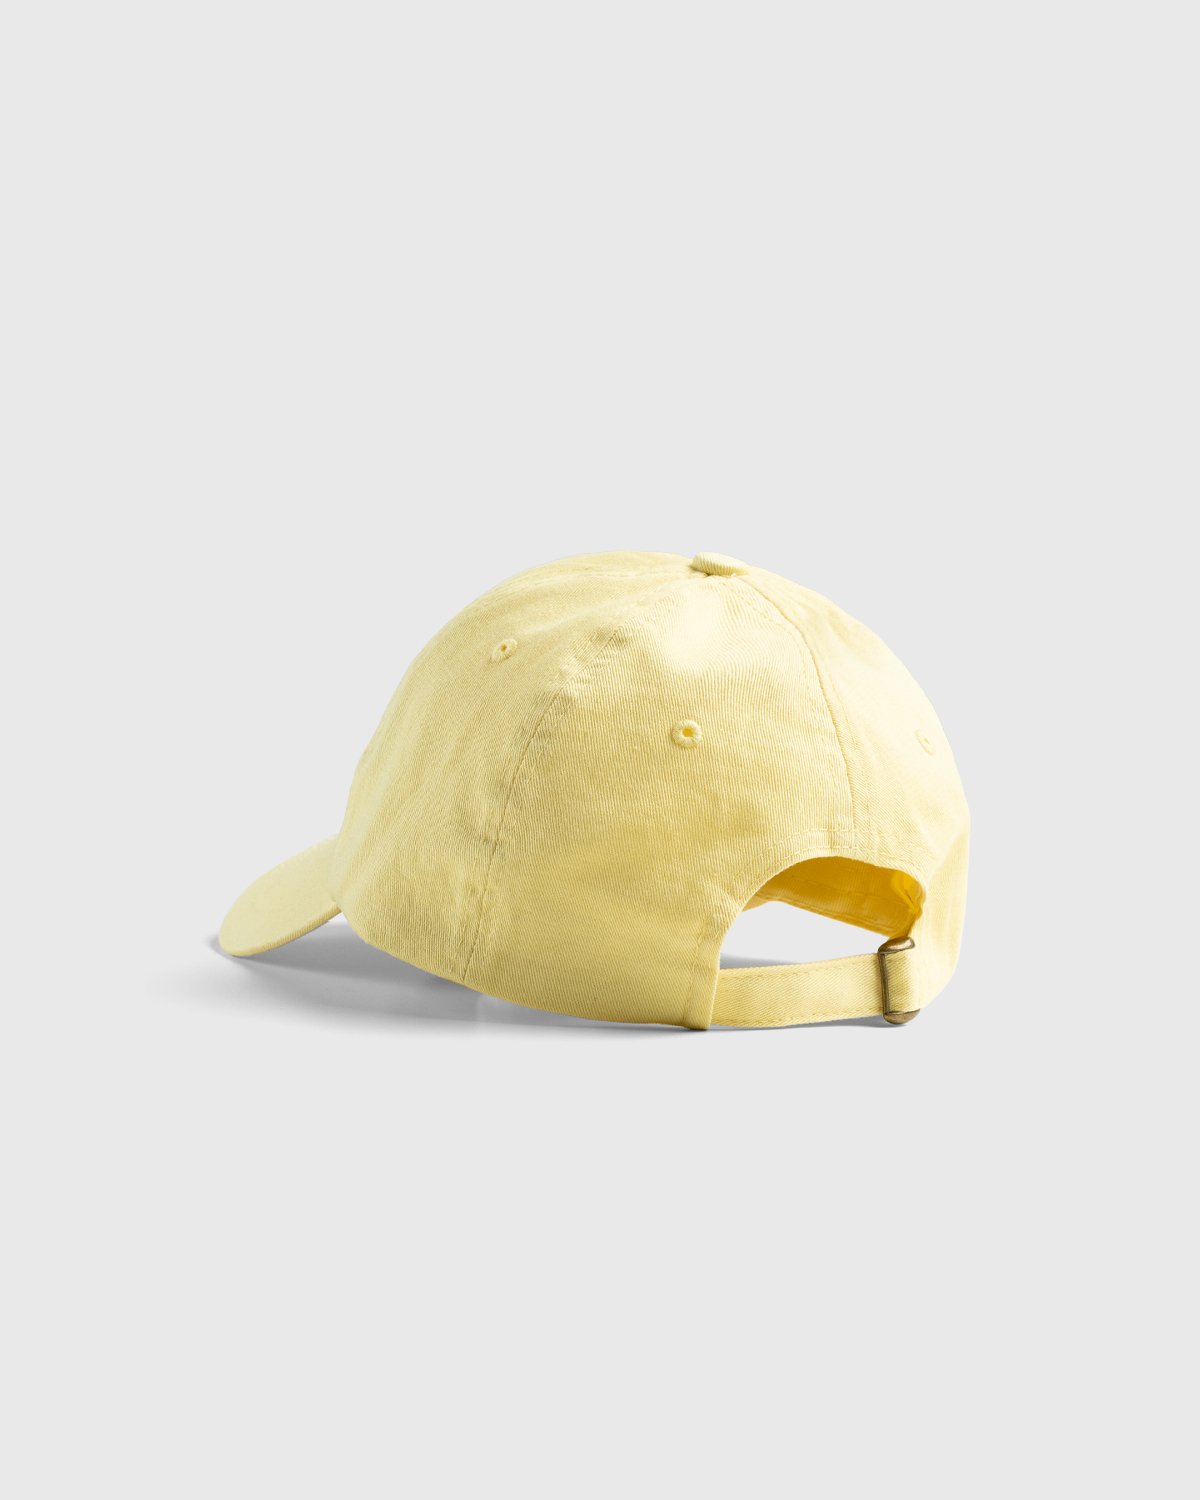 HO HO COCO - On Vacation Cap Yellow - Accessories - Yellow - Image 3